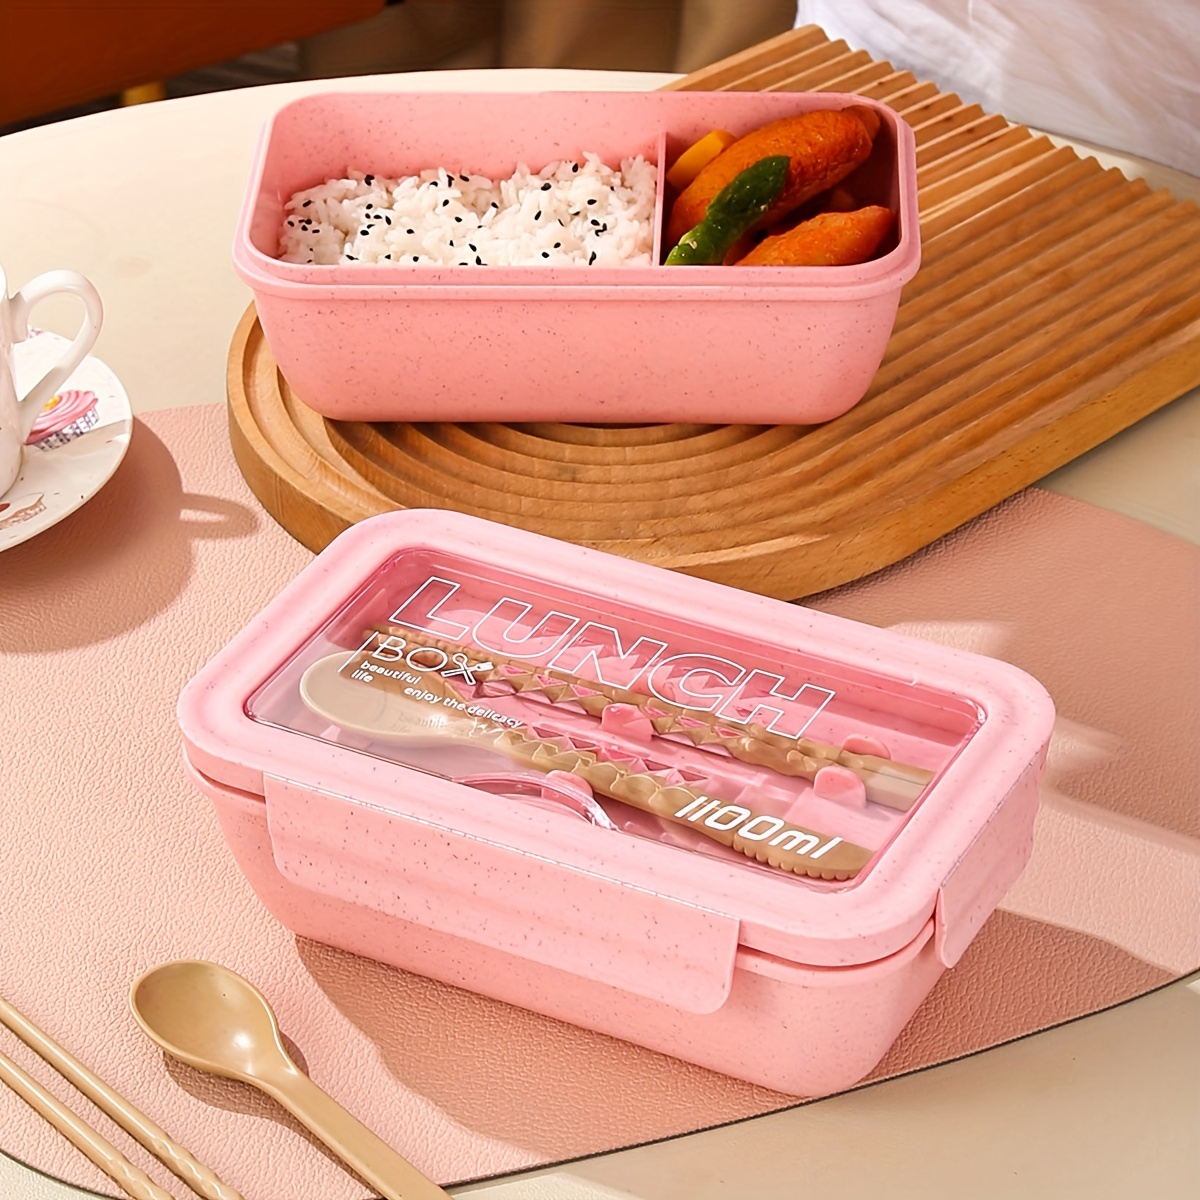 Wheat Straw Lunch Bento Box Microwave and Dishwasher Safe 850ml Pink